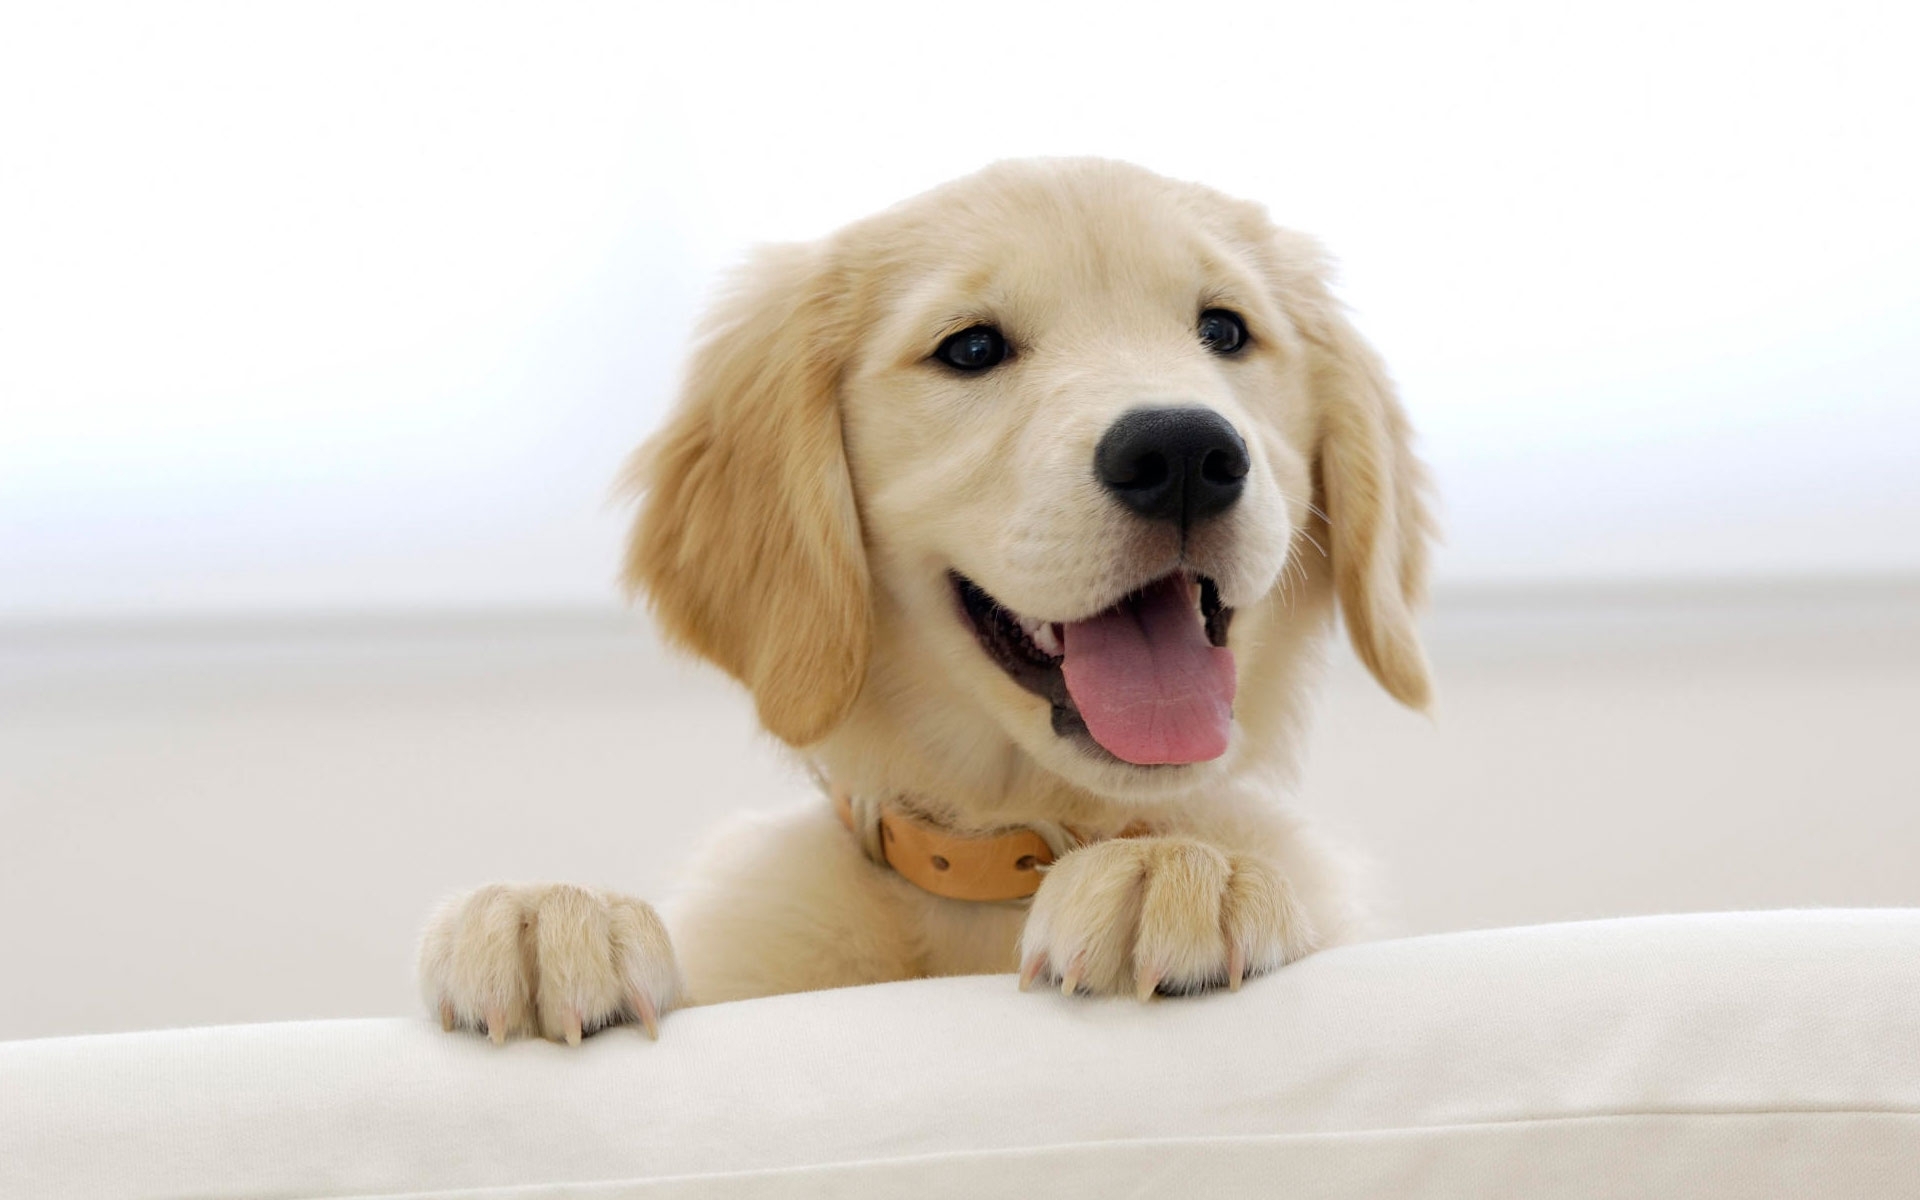 10 New Golden Retriever Puppies Wallpaper FULL HD 1920×1080 For PC Background